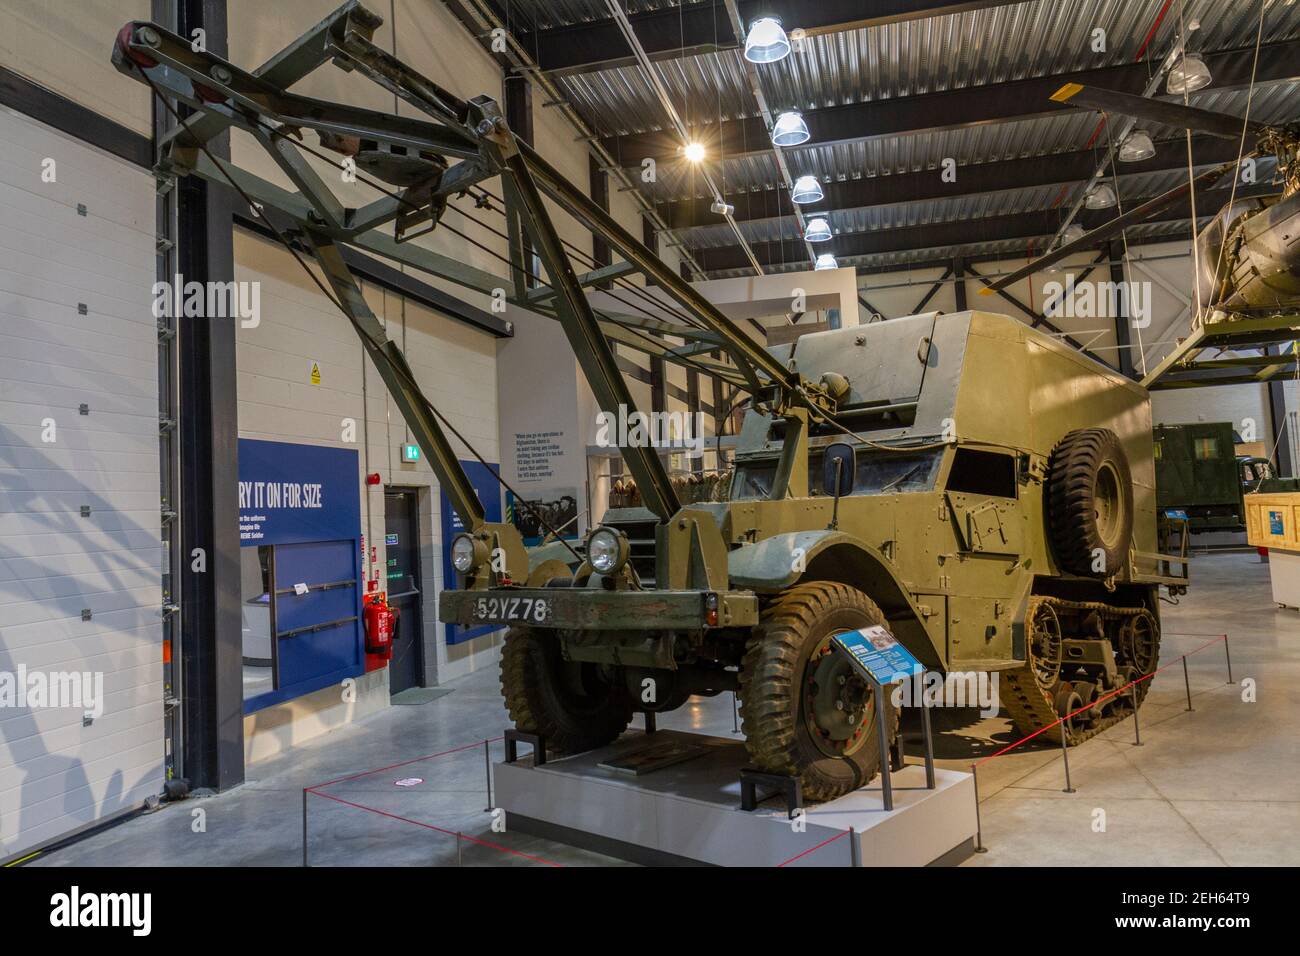 An International Half-Track M5 on display in the REME Museum (Royal Electrical and Mechanical Engineers), Lyneham, Wiltshire, UK. Stock Photo